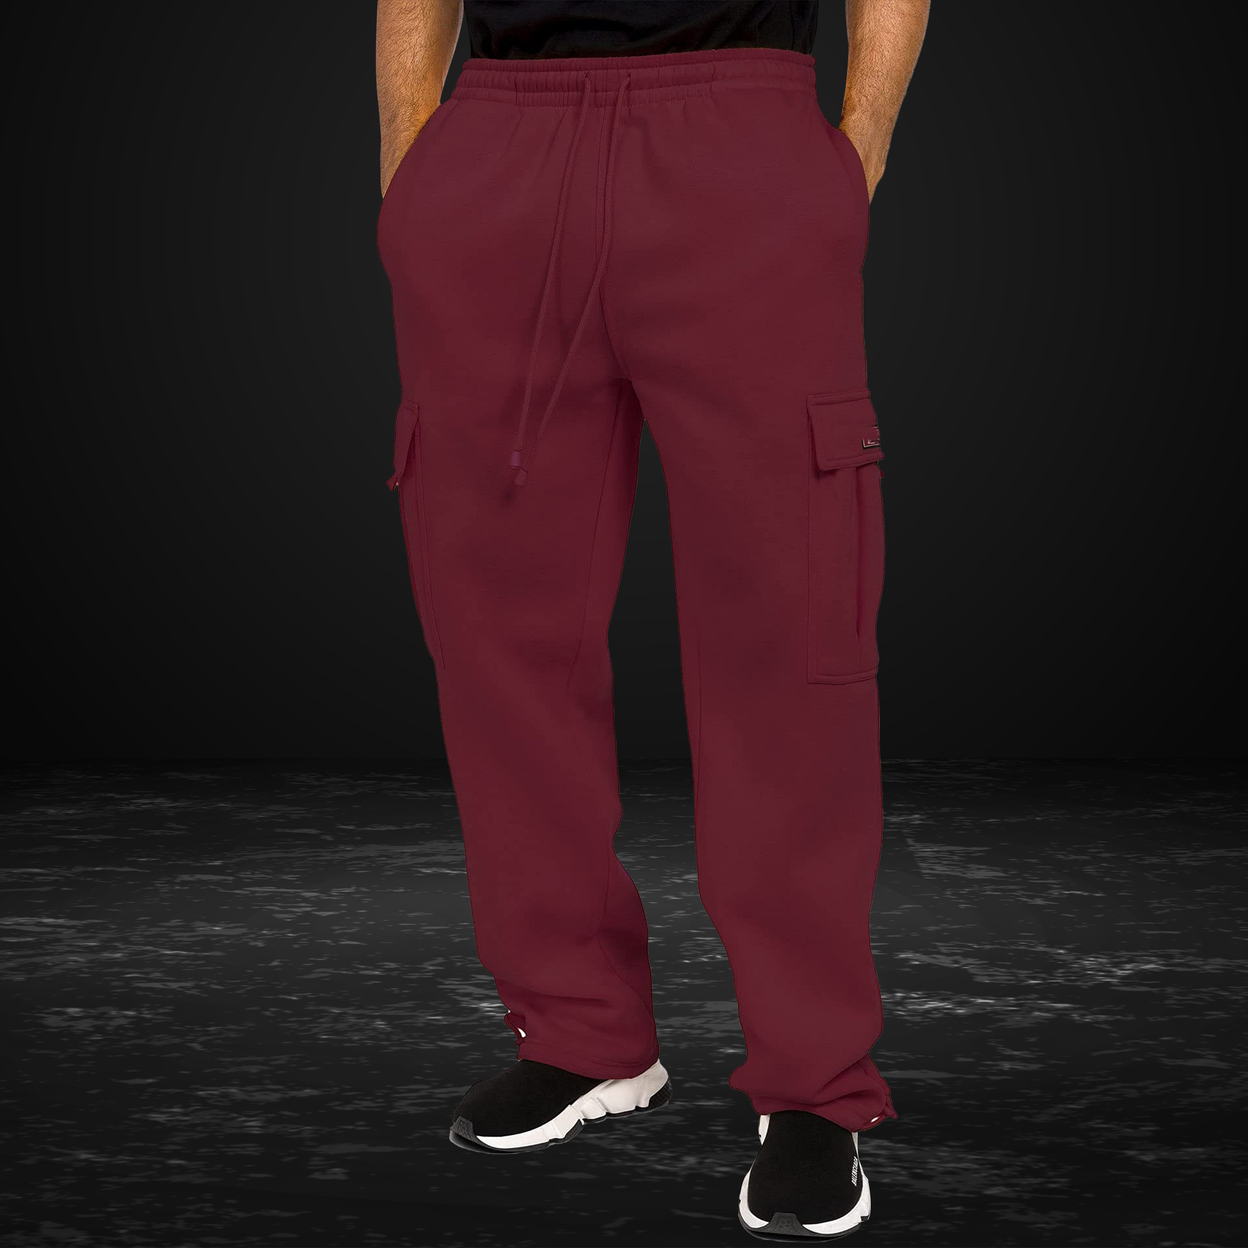 Multipack Men's Casual Solid Cargo Jogger Sweatpants With Pockets - 3, 2xl